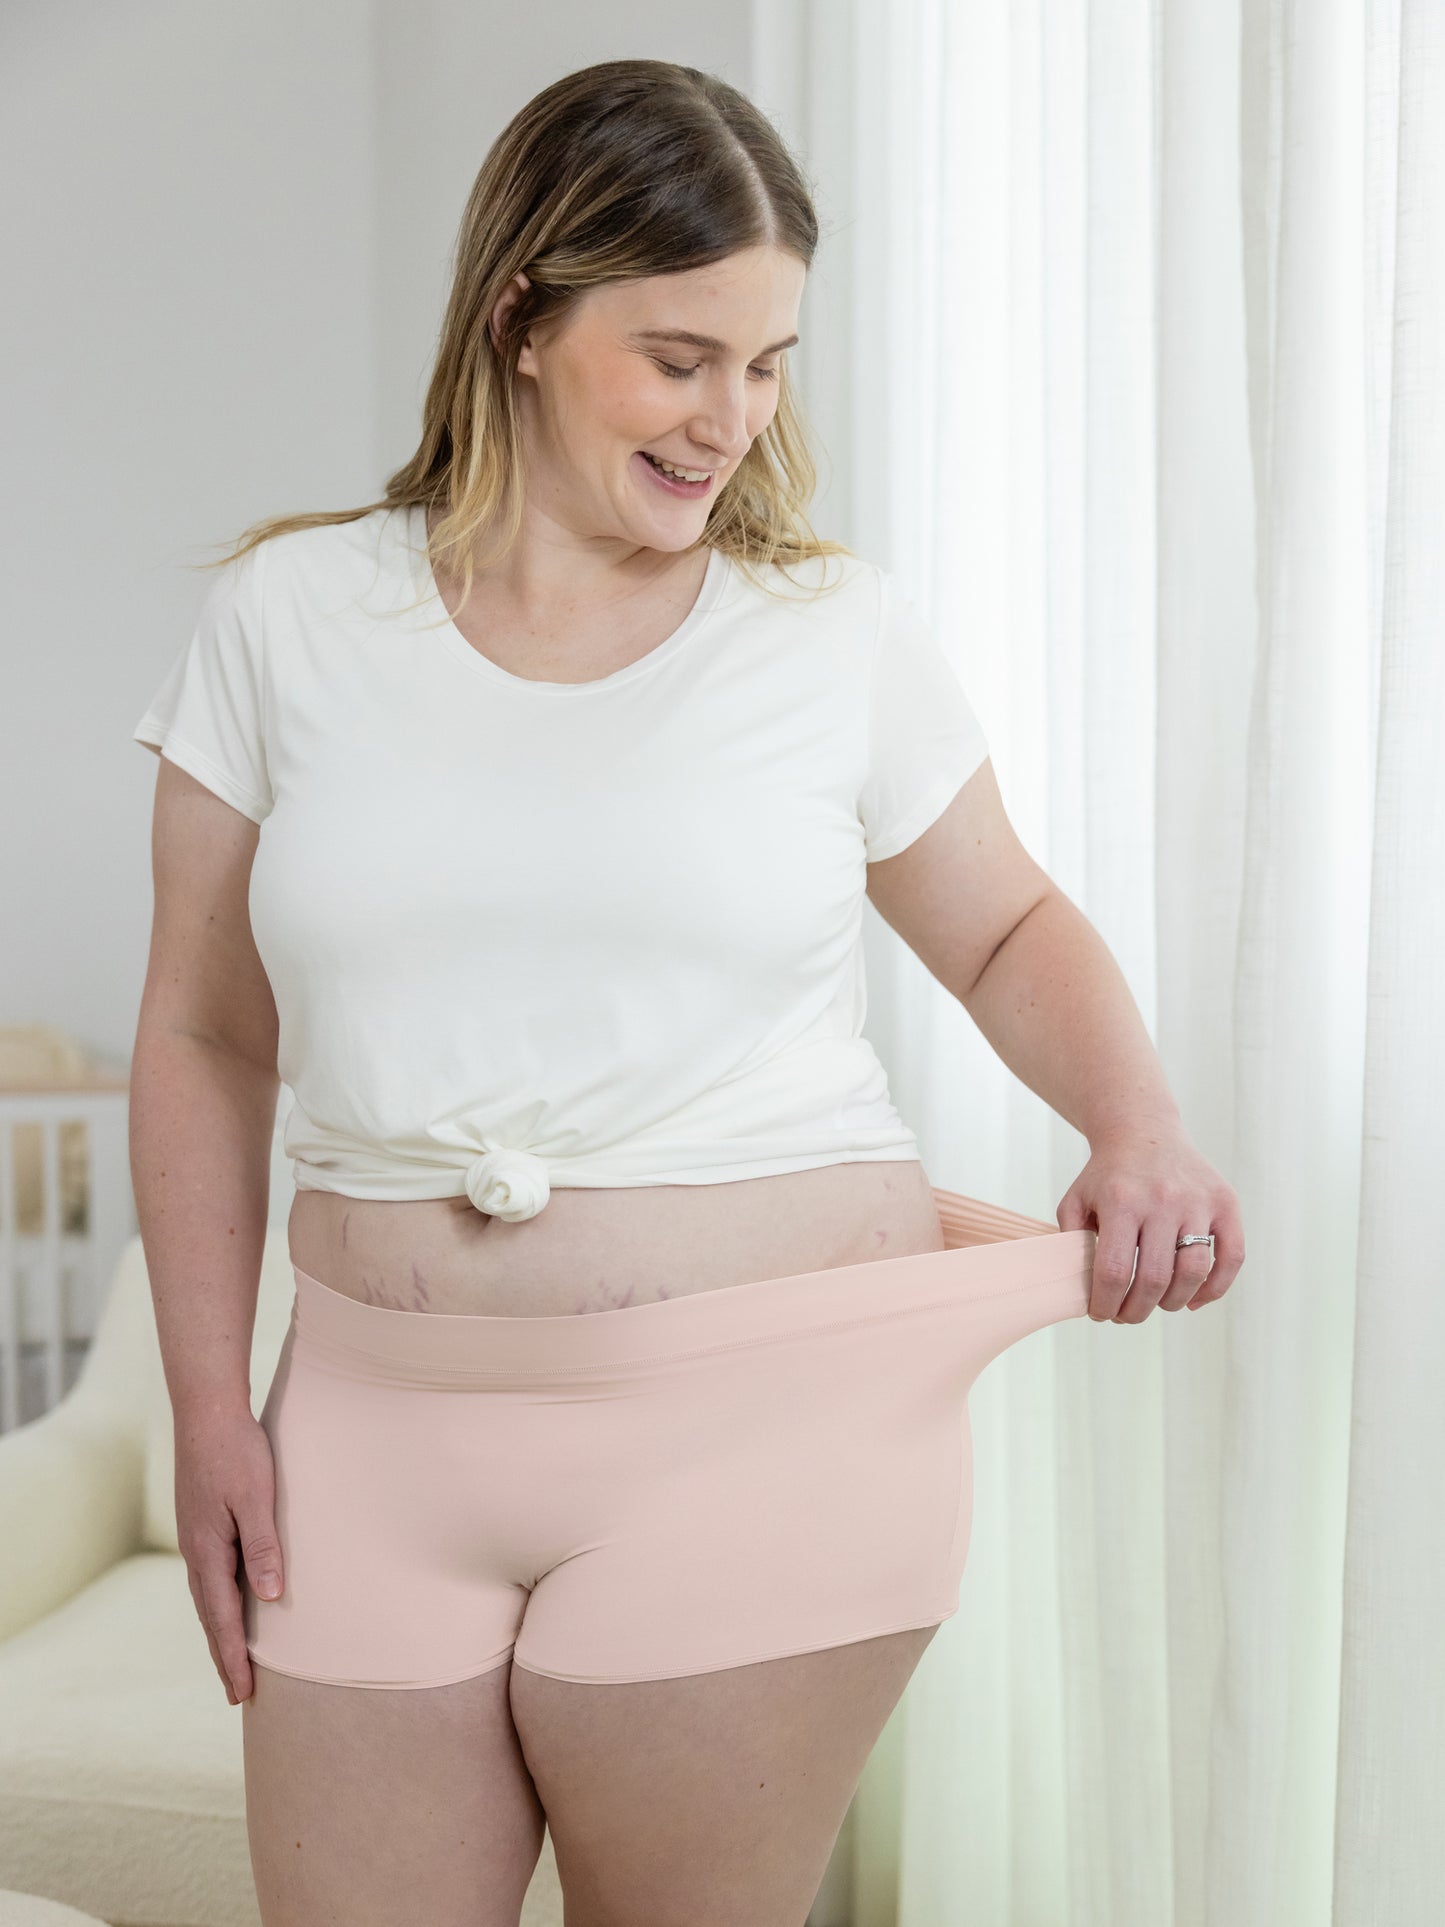 Model wearing the Everyday Nursing T-shirt in White tied up and paired with the Grow with Me™ Maternity & Postpartum Boyshort in Soft Pink. She is pulling the waistband of the underwear to show the stretch.